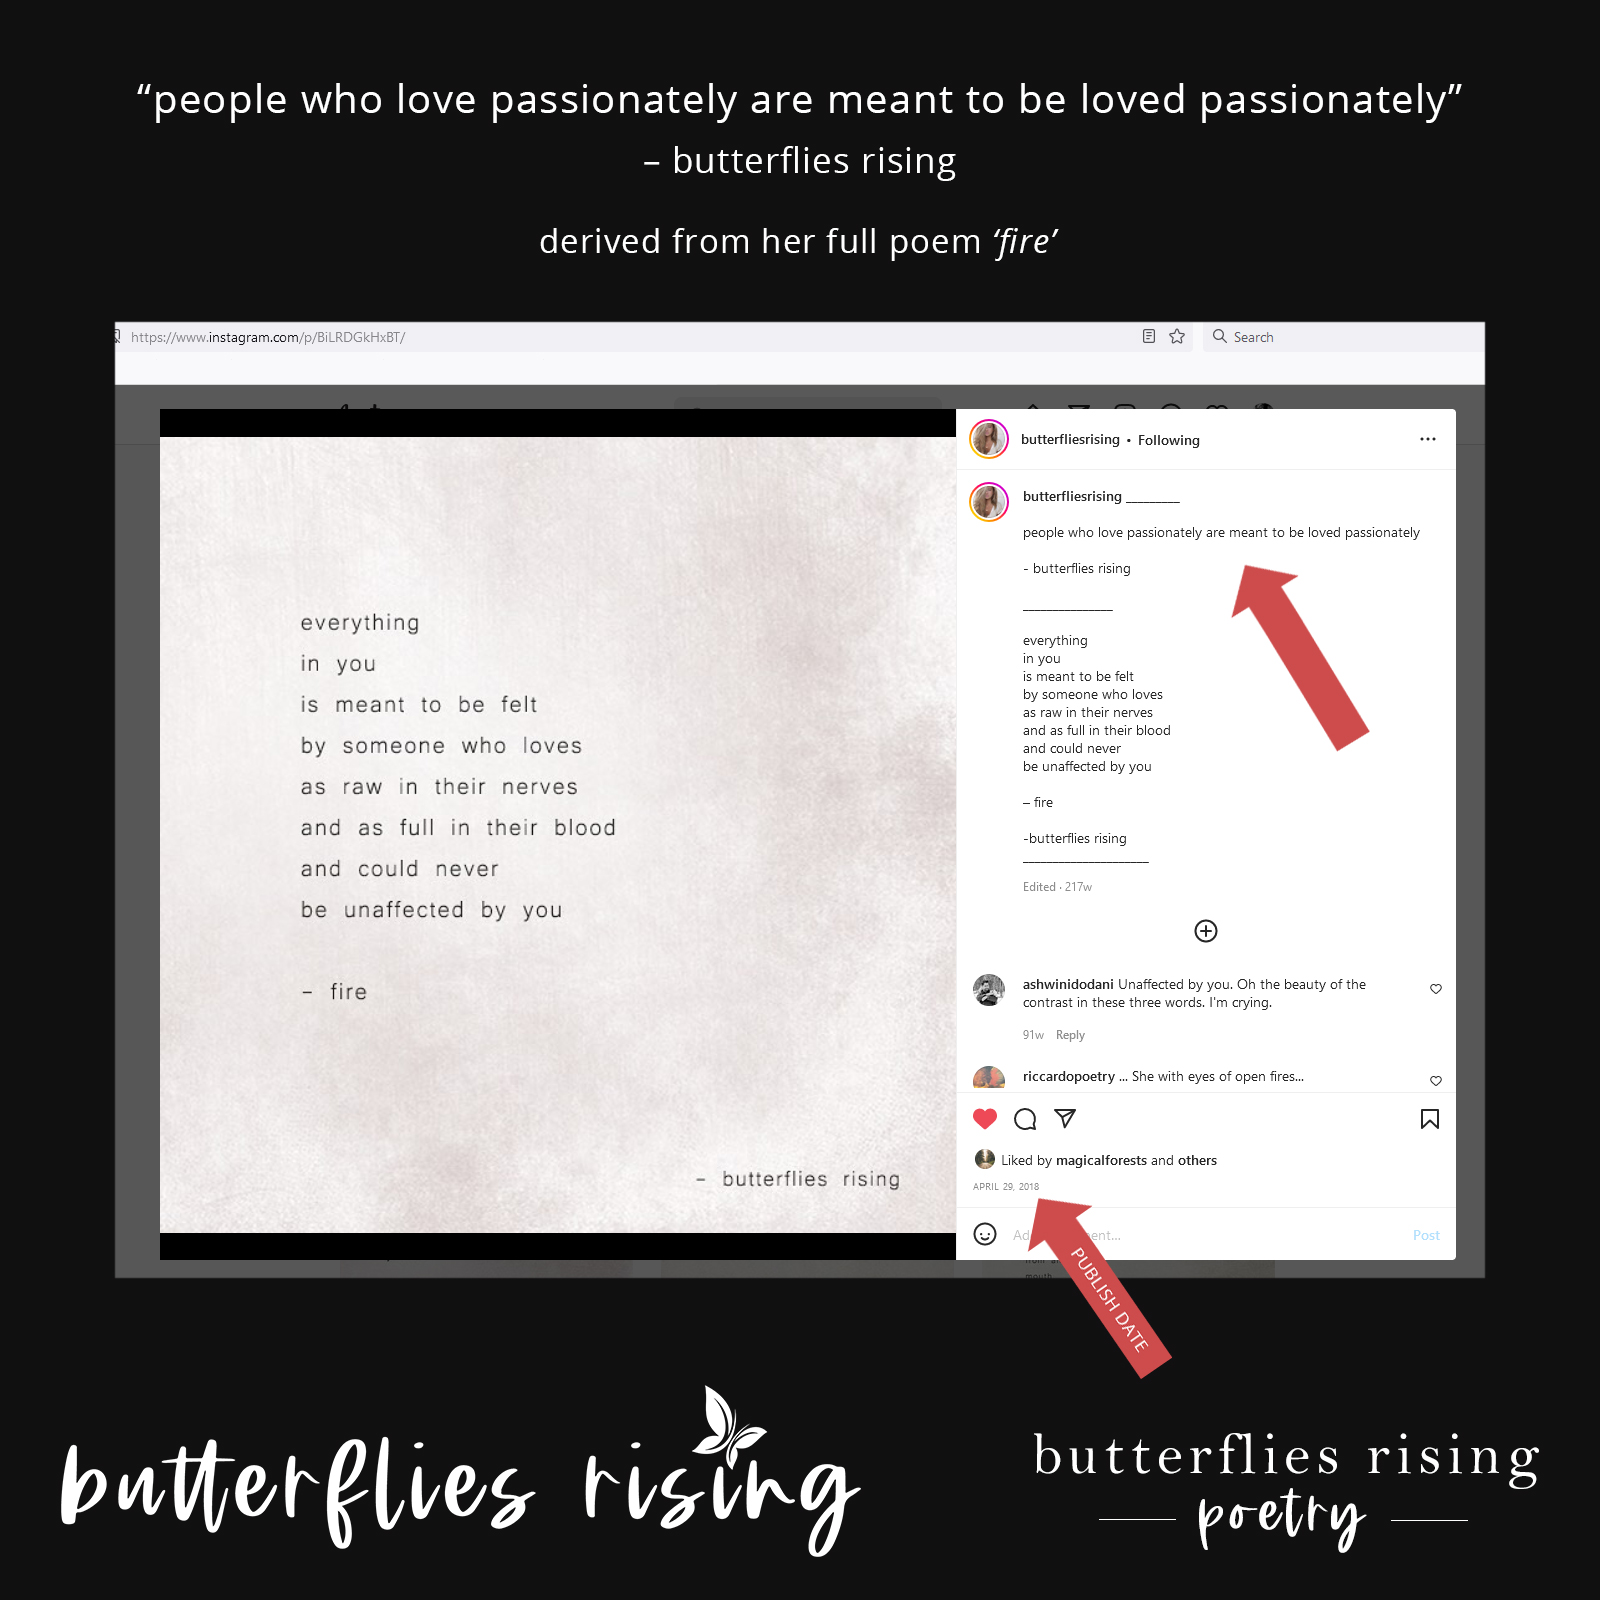 people who love passionately are meant to be loved passionately - butterflies rising